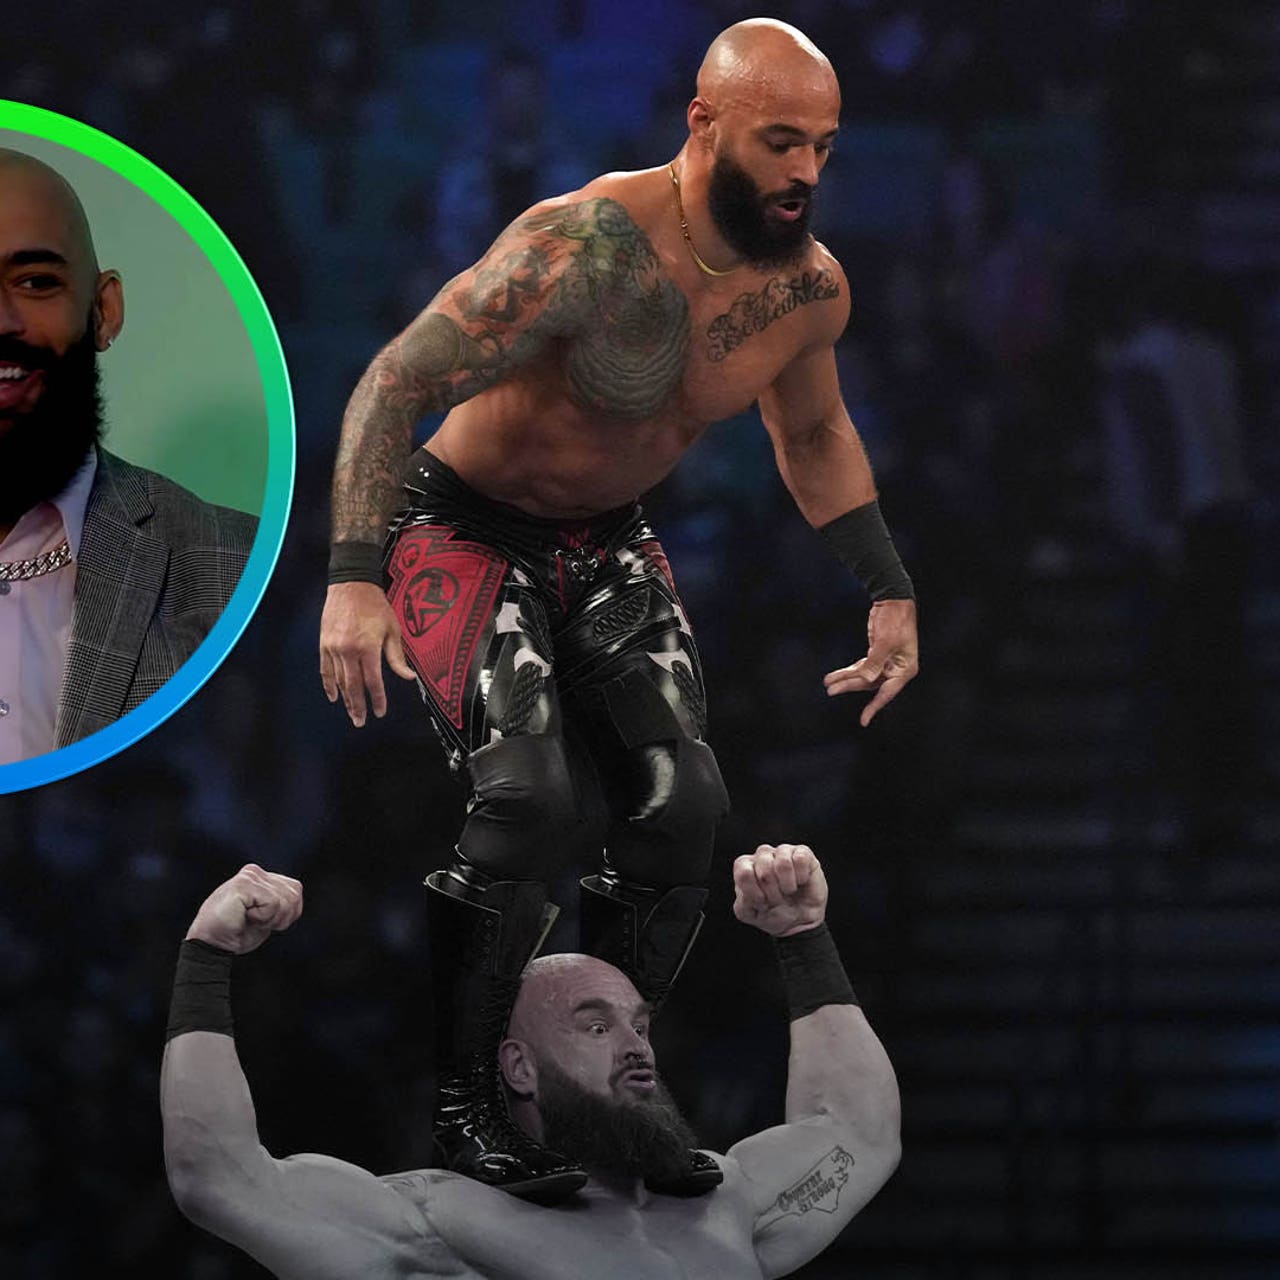 Ricochet calls his tag team with Braun Strowman a cheat code and